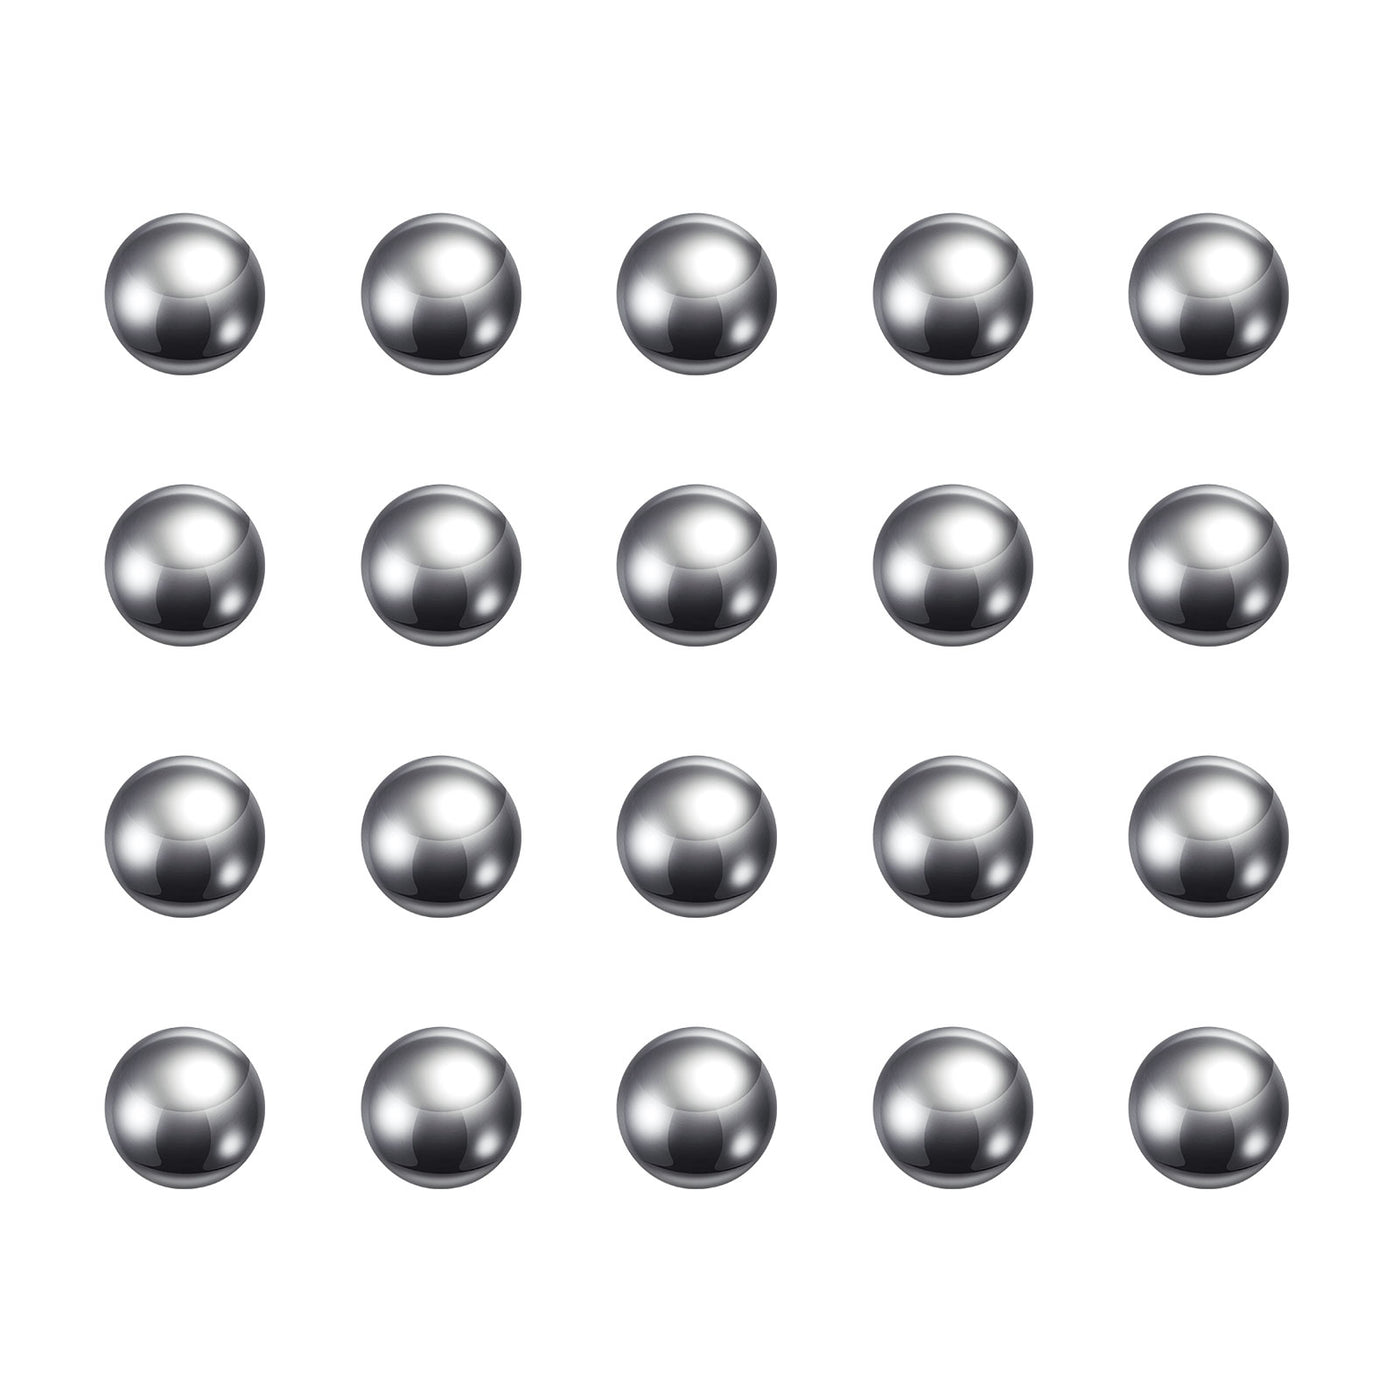 Uxcell Uxcell 10mm Carbon Steel Bearing Precision Balls Bearings Ball 1 Pack(About 0.25KG)